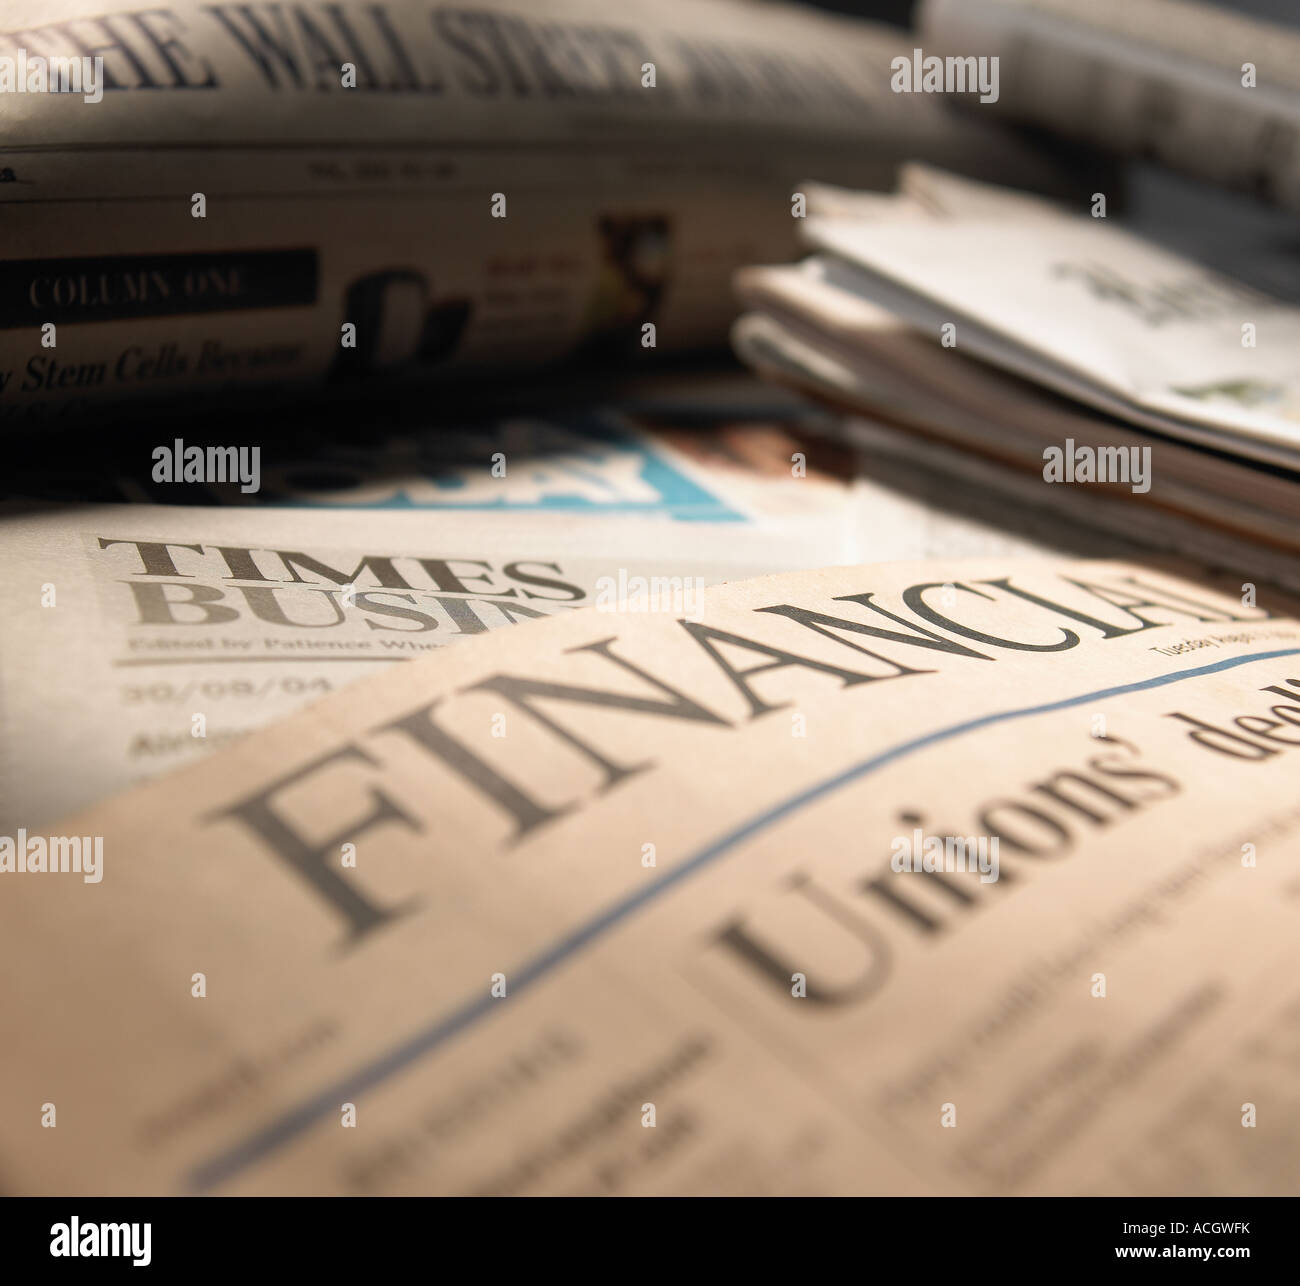 A pile of american financial times business newspapers Stock Photo - Alamy